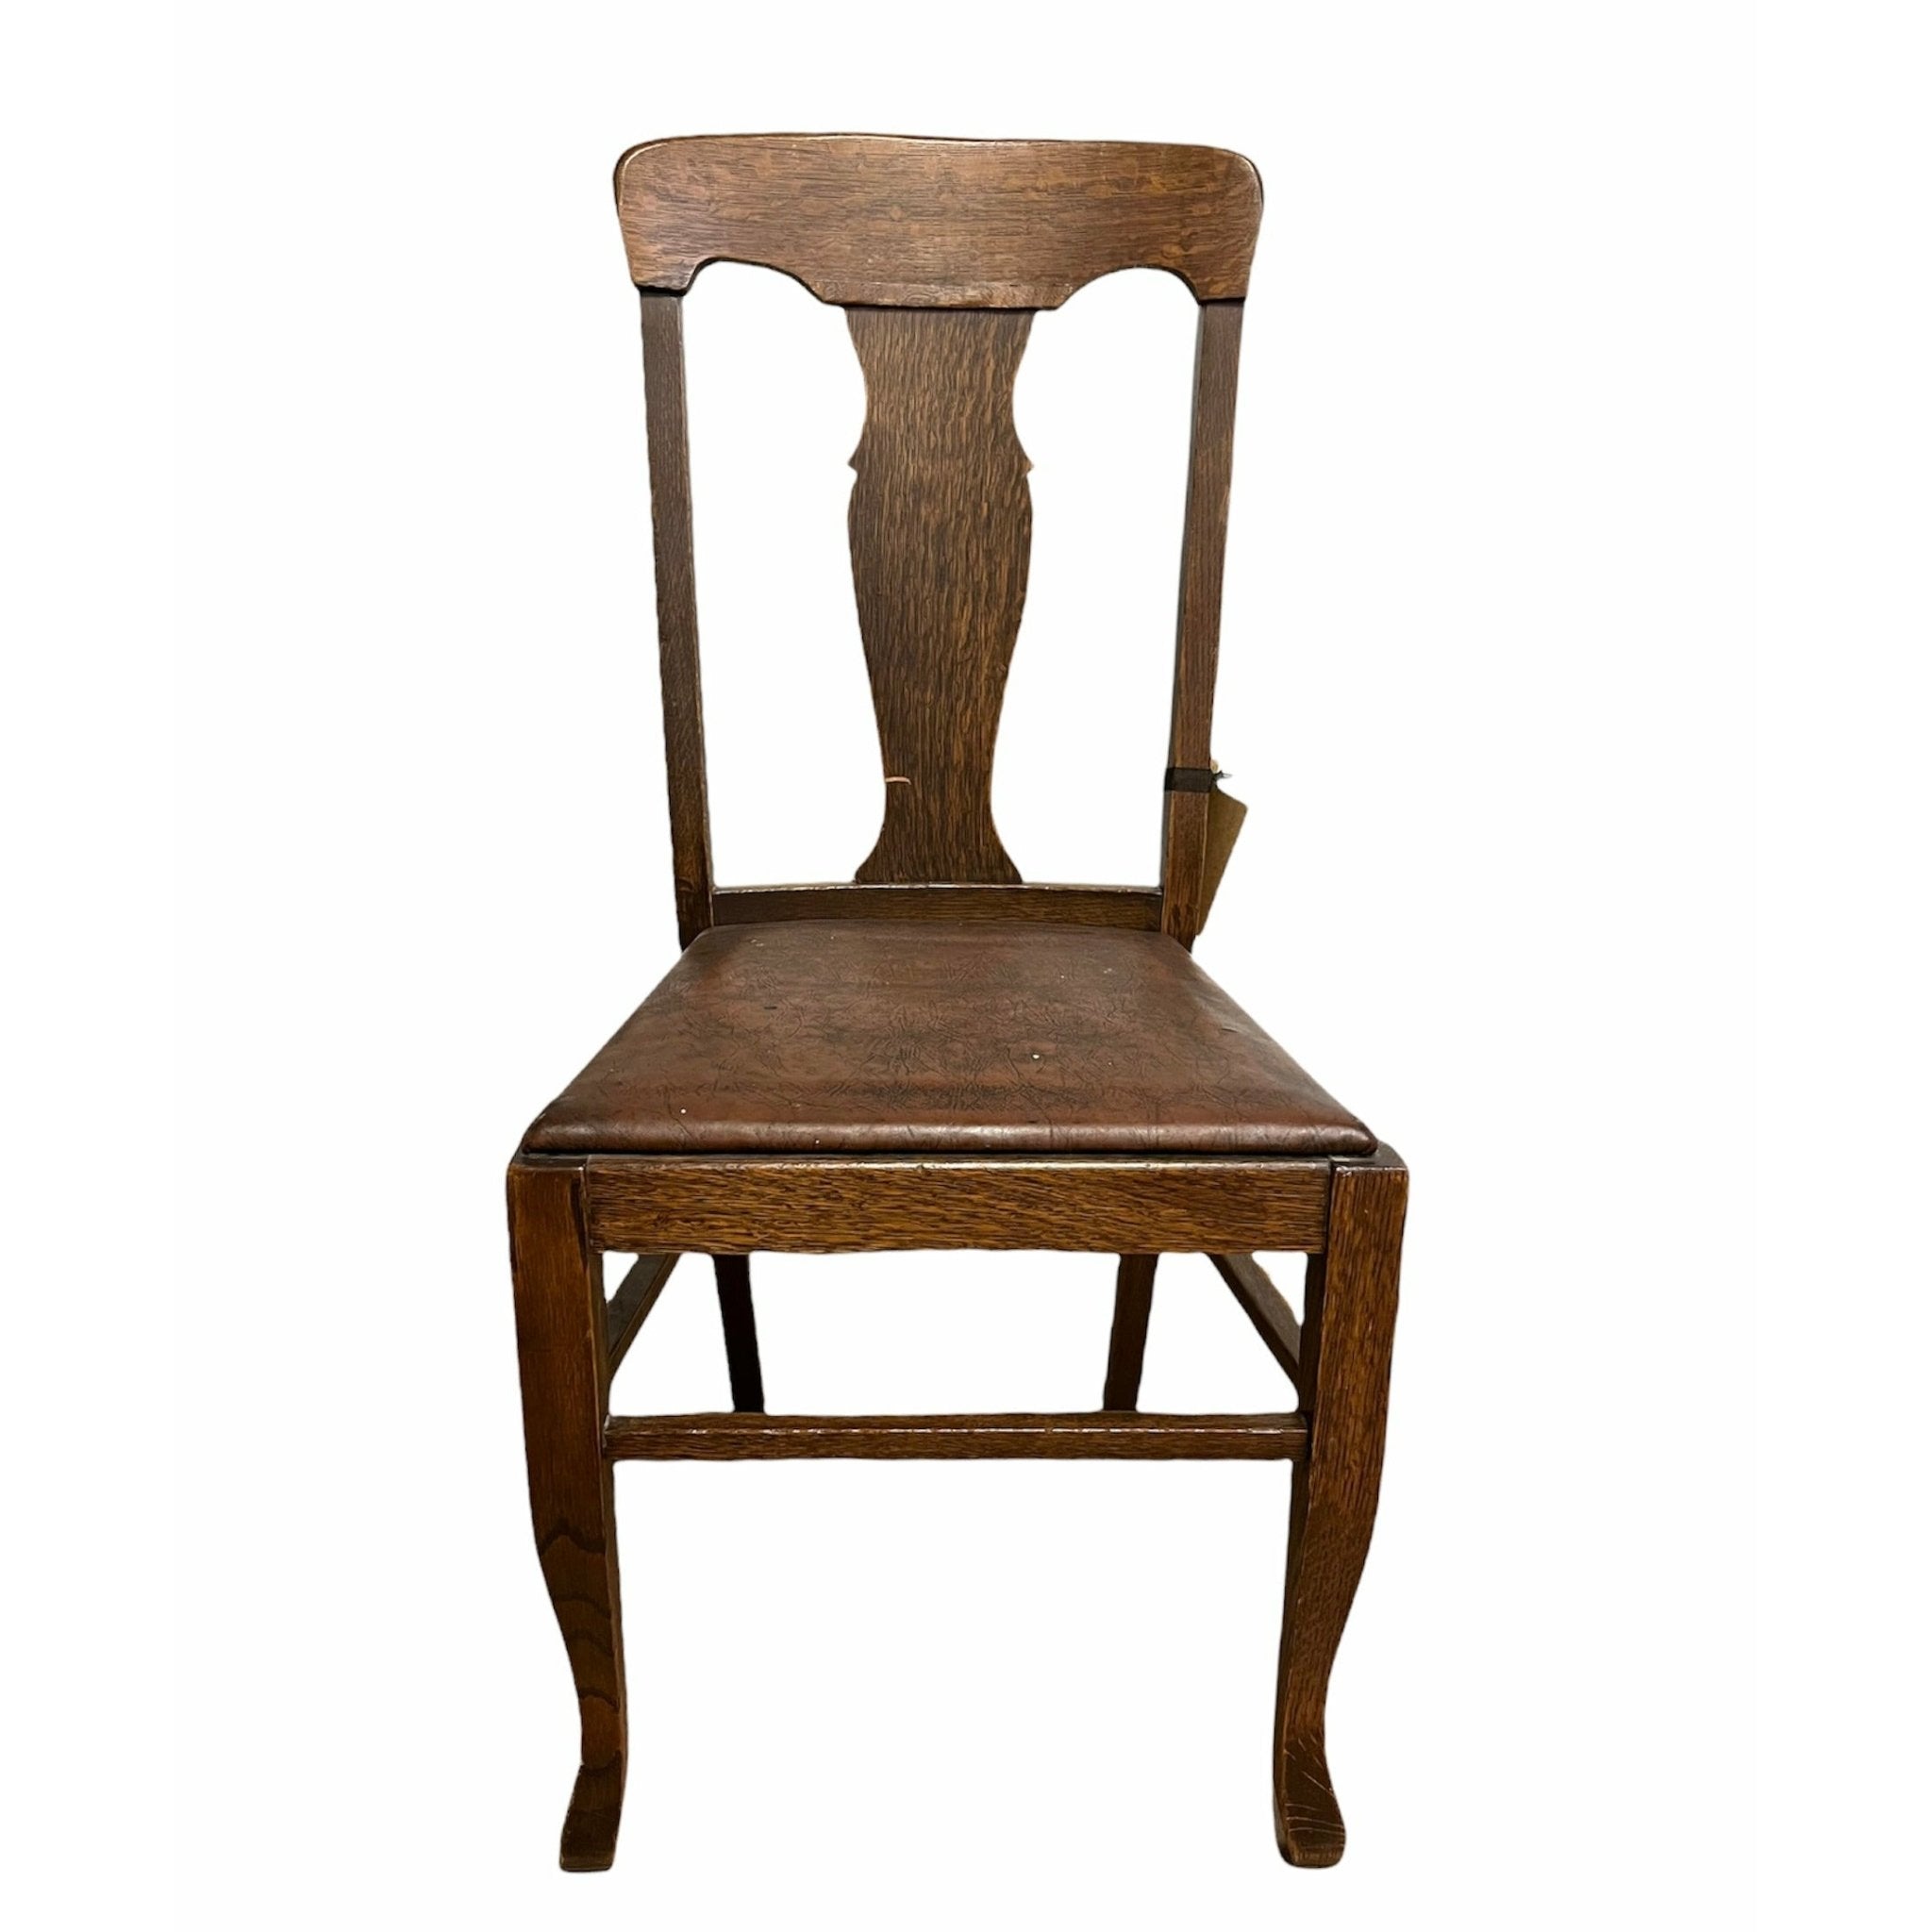 Oak Chair With Leather Seat